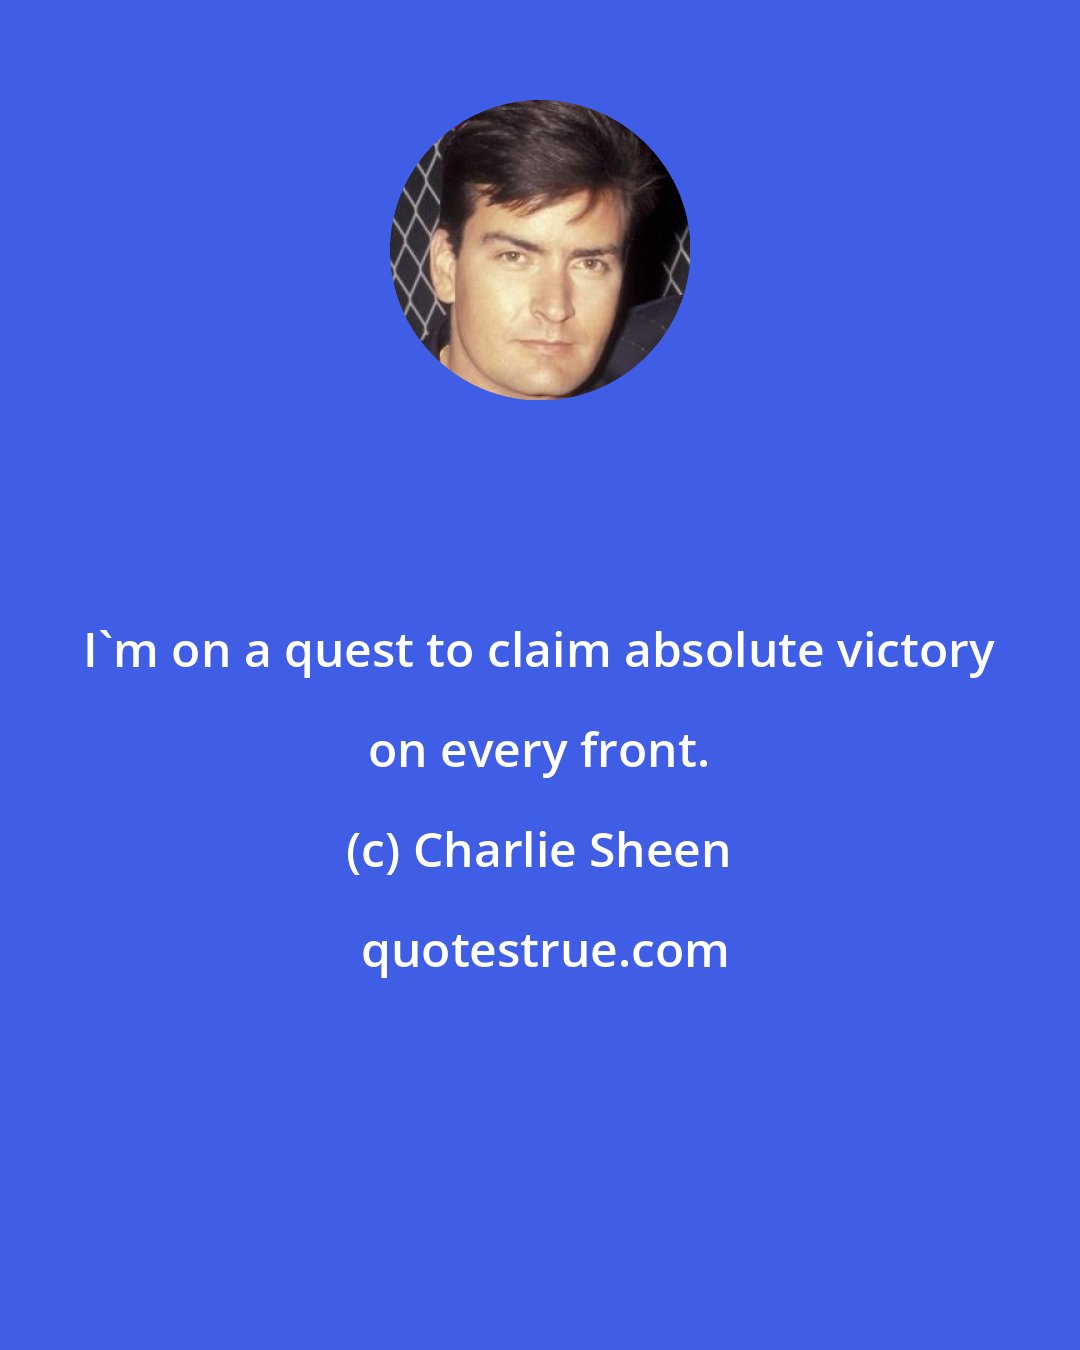 Charlie Sheen: I'm on a quest to claim absolute victory on every front.